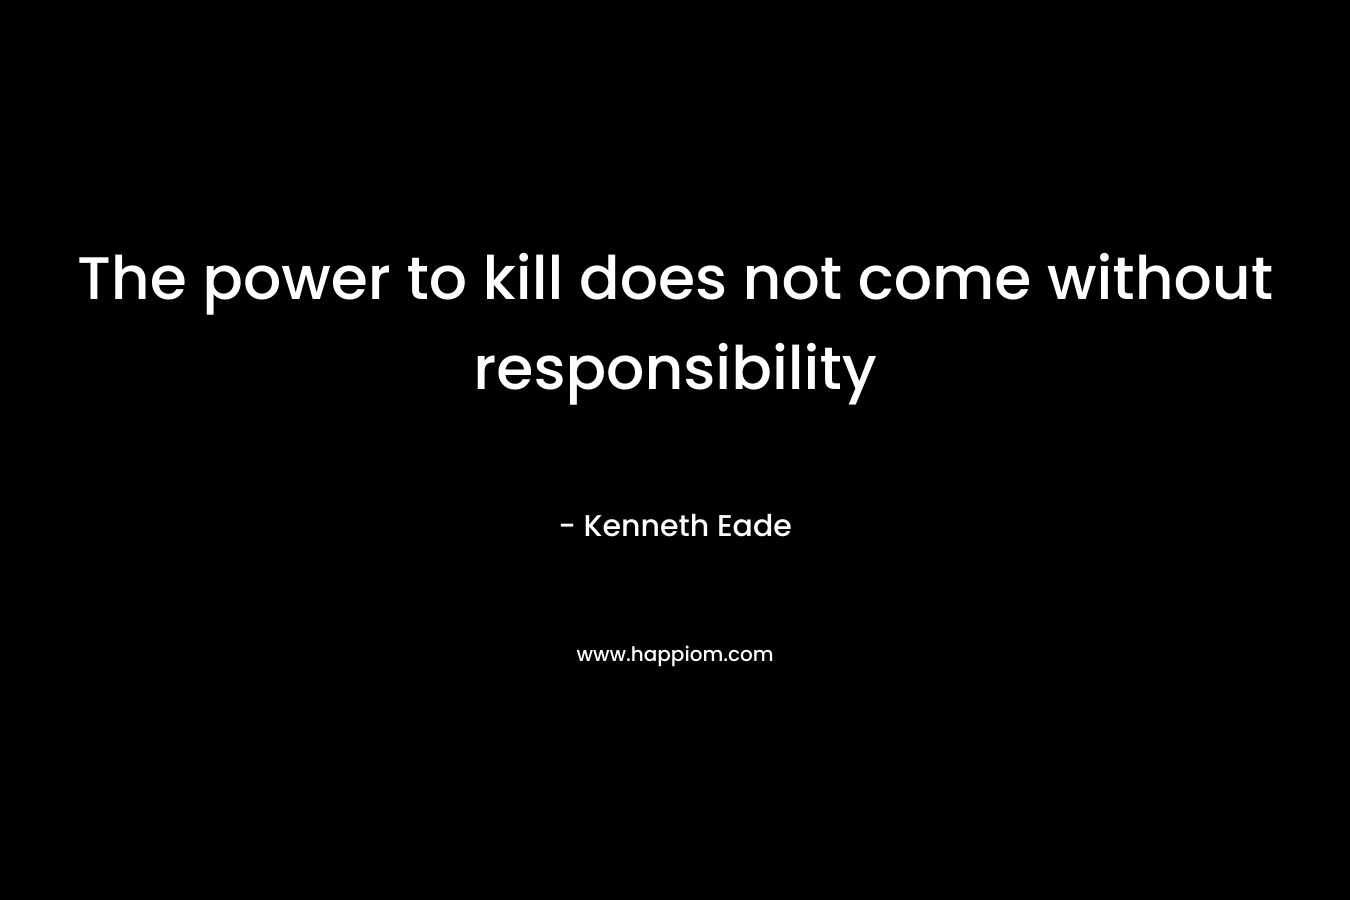 The power to kill does not come without responsibility